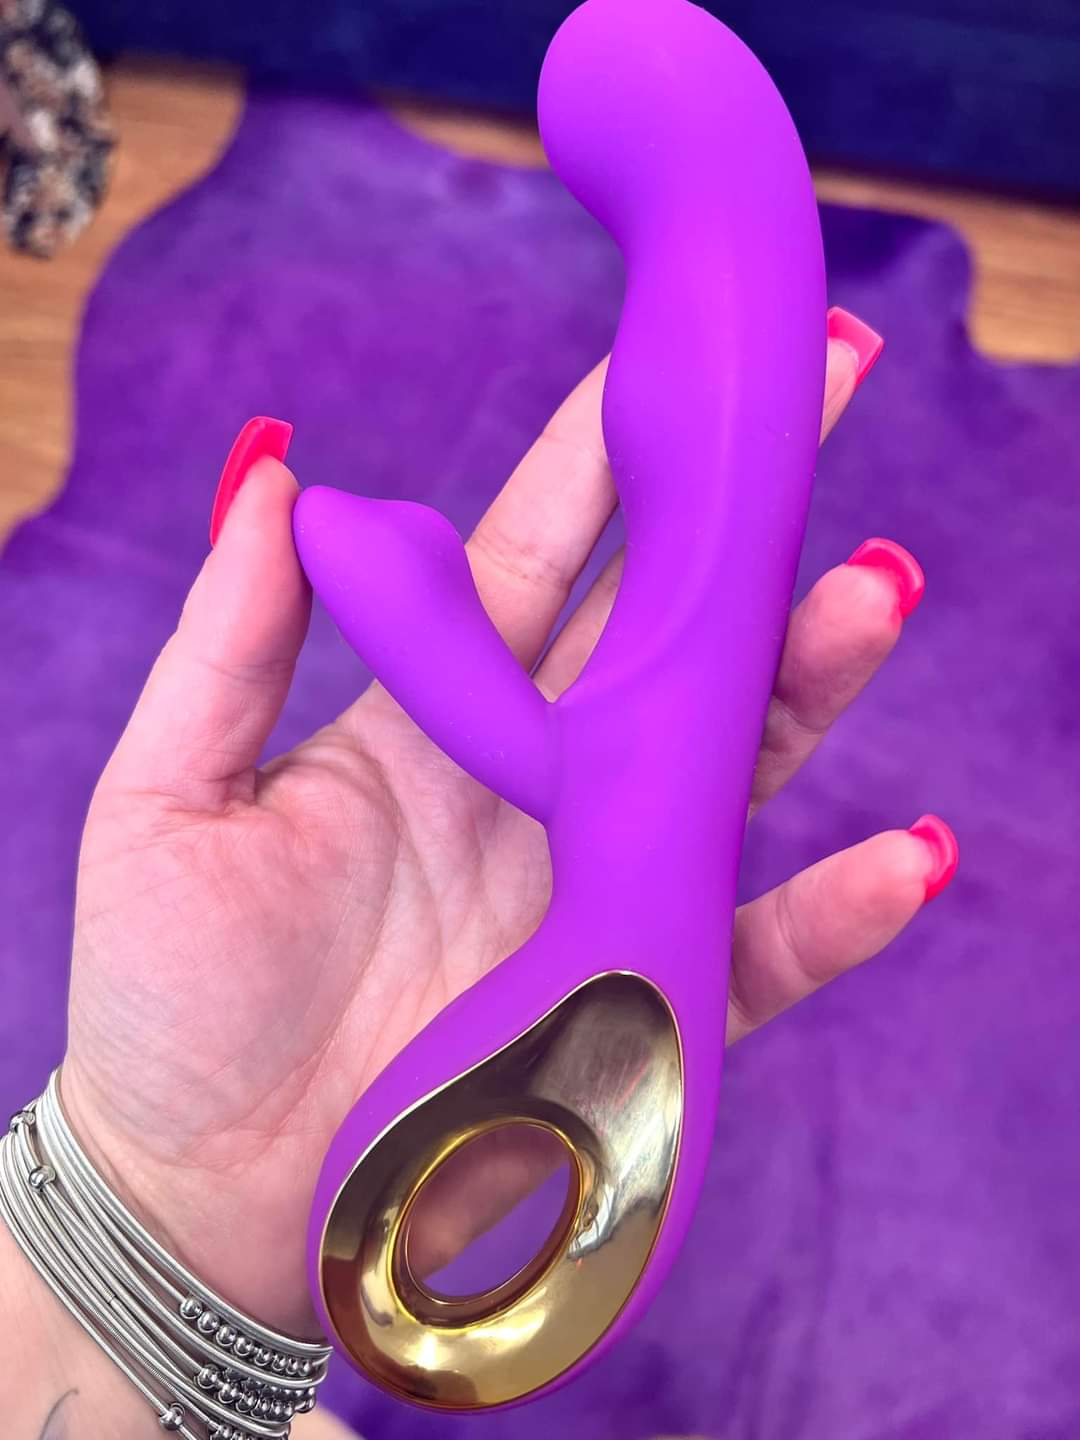 The Hookup Adult Toy